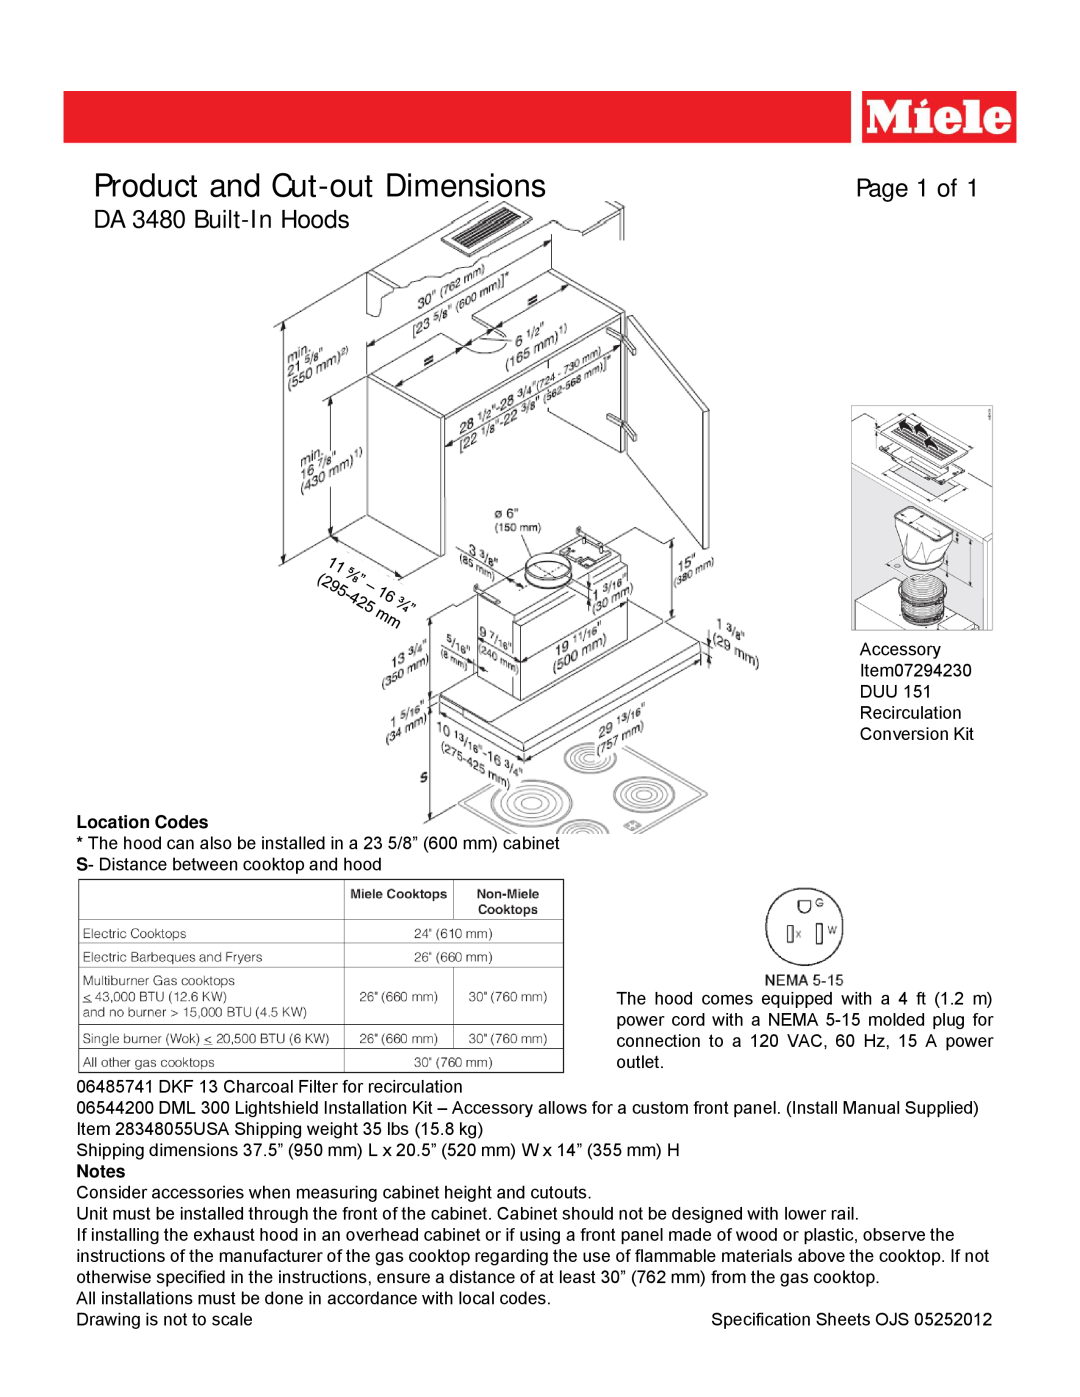 Miele dimensions Product and Cut-outDimensions, Page 1 of, DA 3480 Built-InHoods, Location Codes 